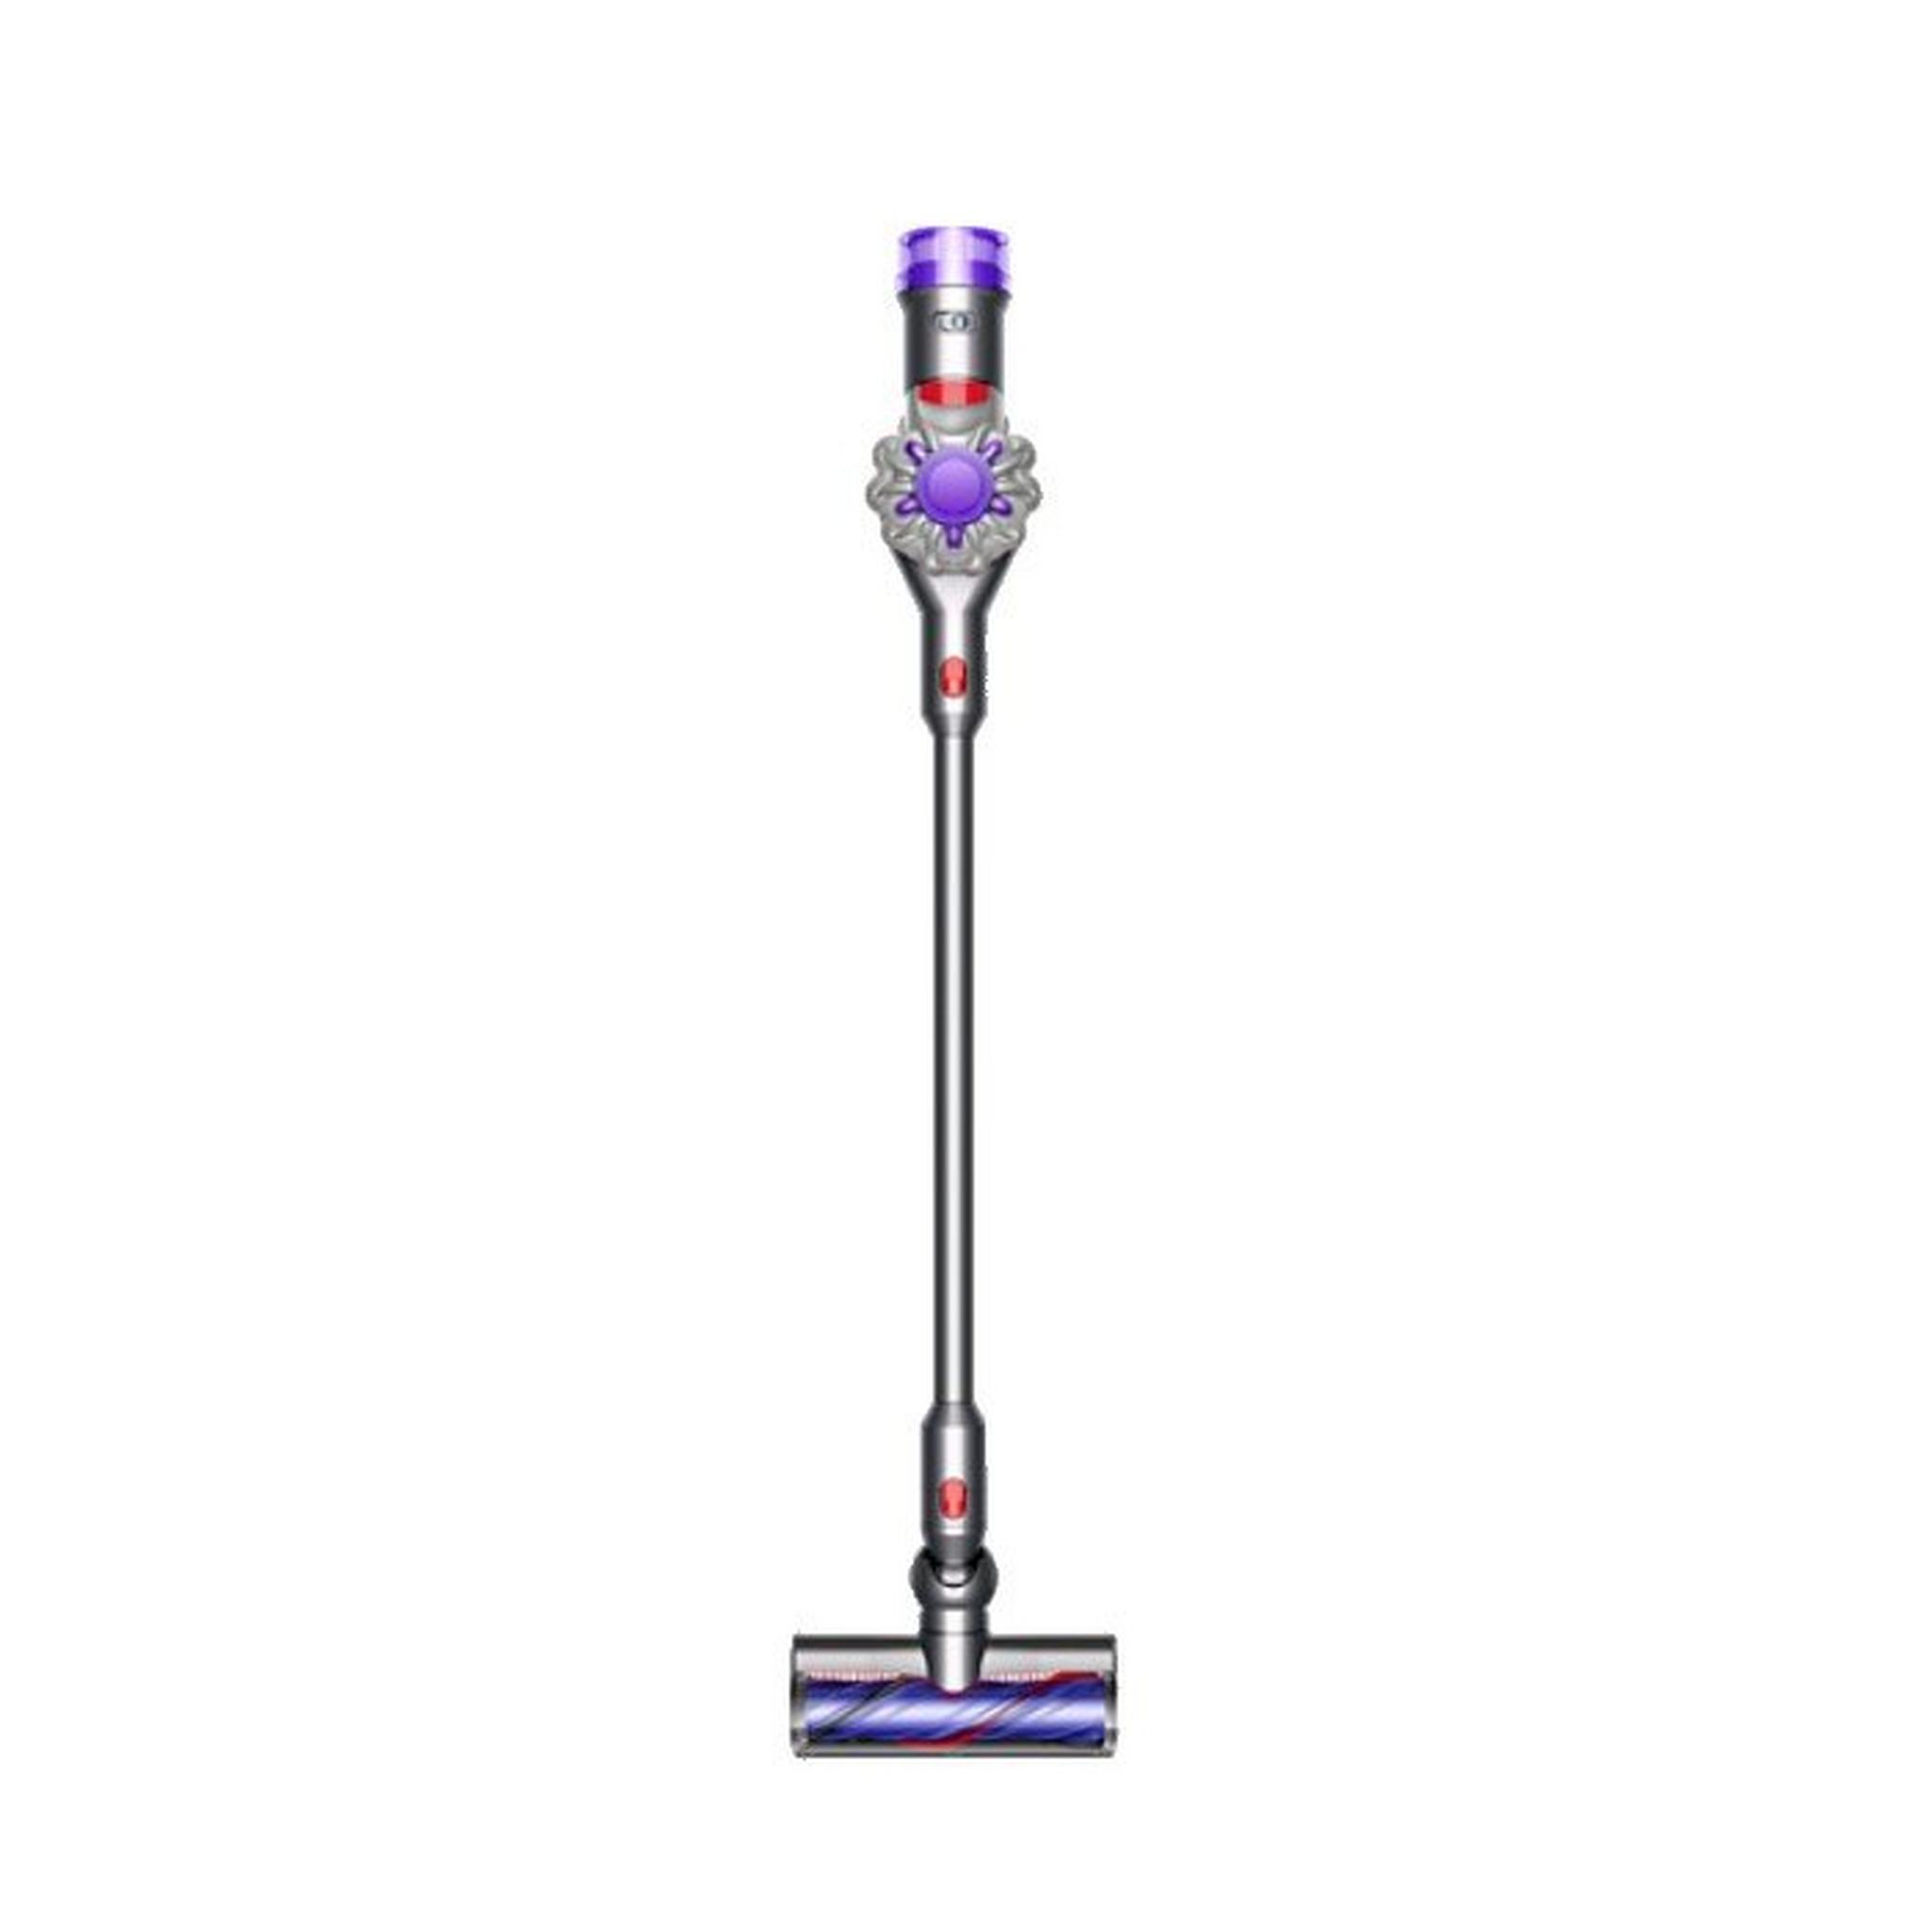 Dyson V8 Cordless Vacuum Cleaner, 115W, 0.54L, SV25 - Silver